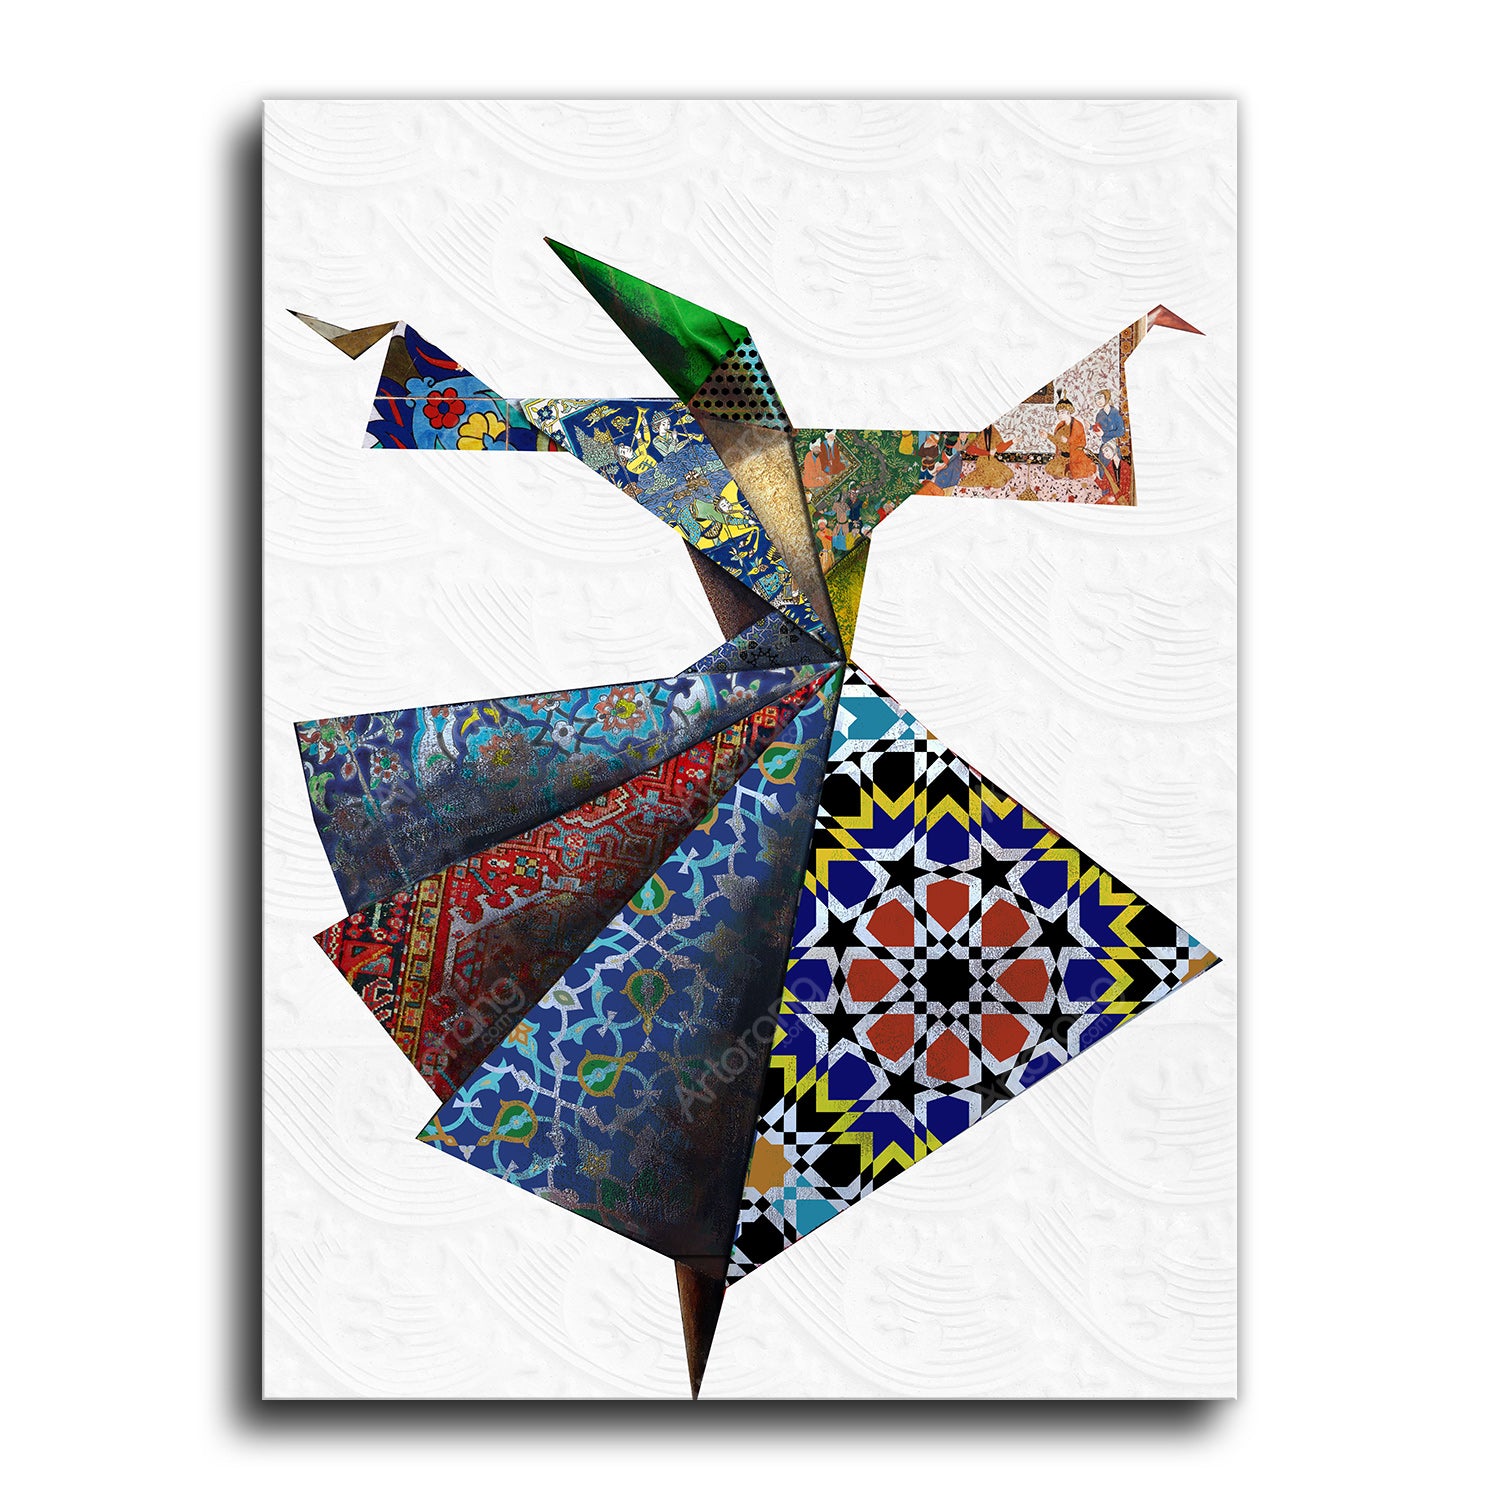 Ancient Sufi dance and whirling dervish with Persian pattern - Artorang